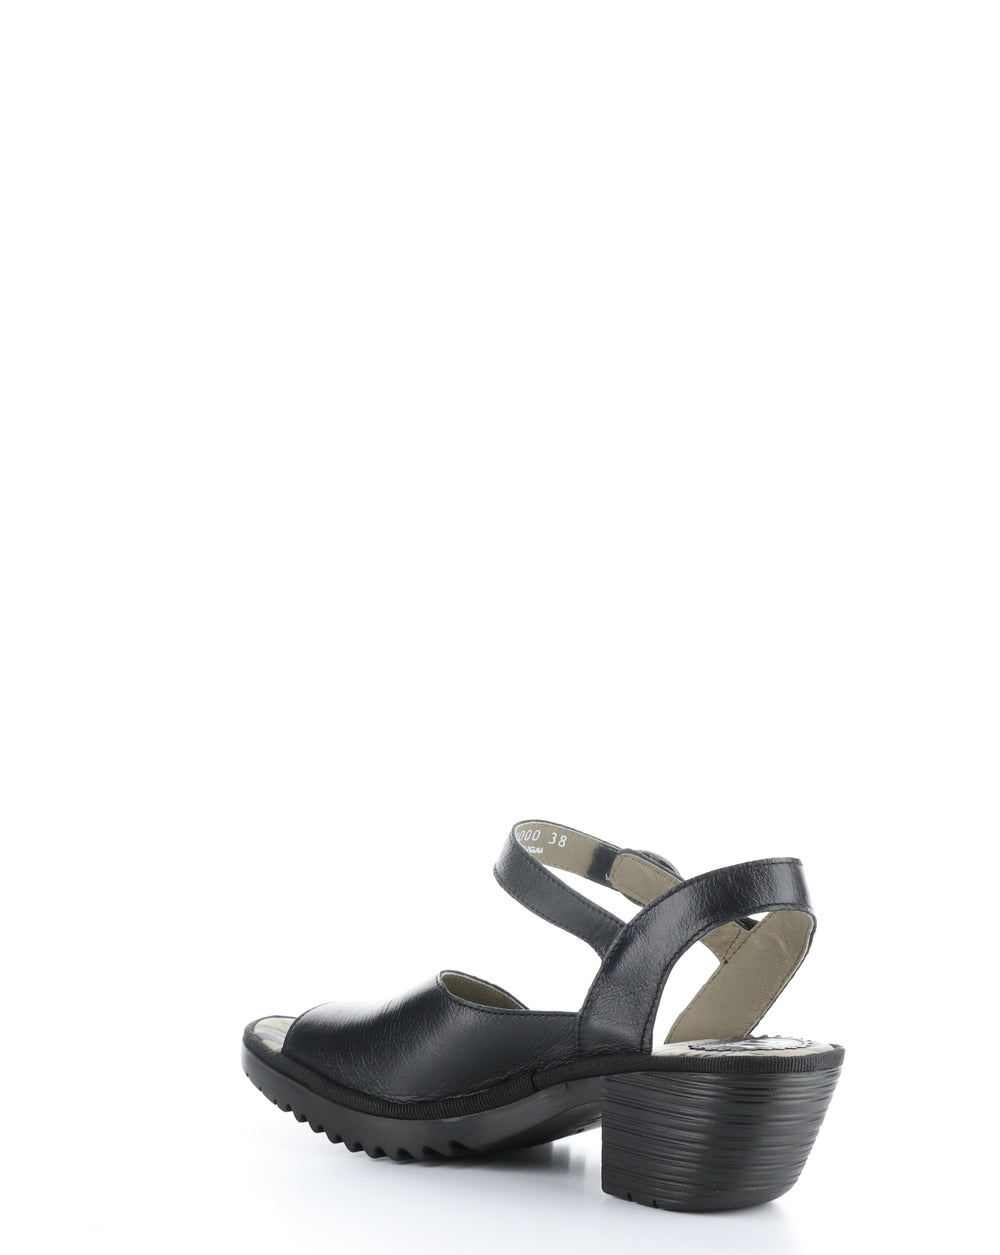 WELY439FLY 000 BLACK Velcro Sandals